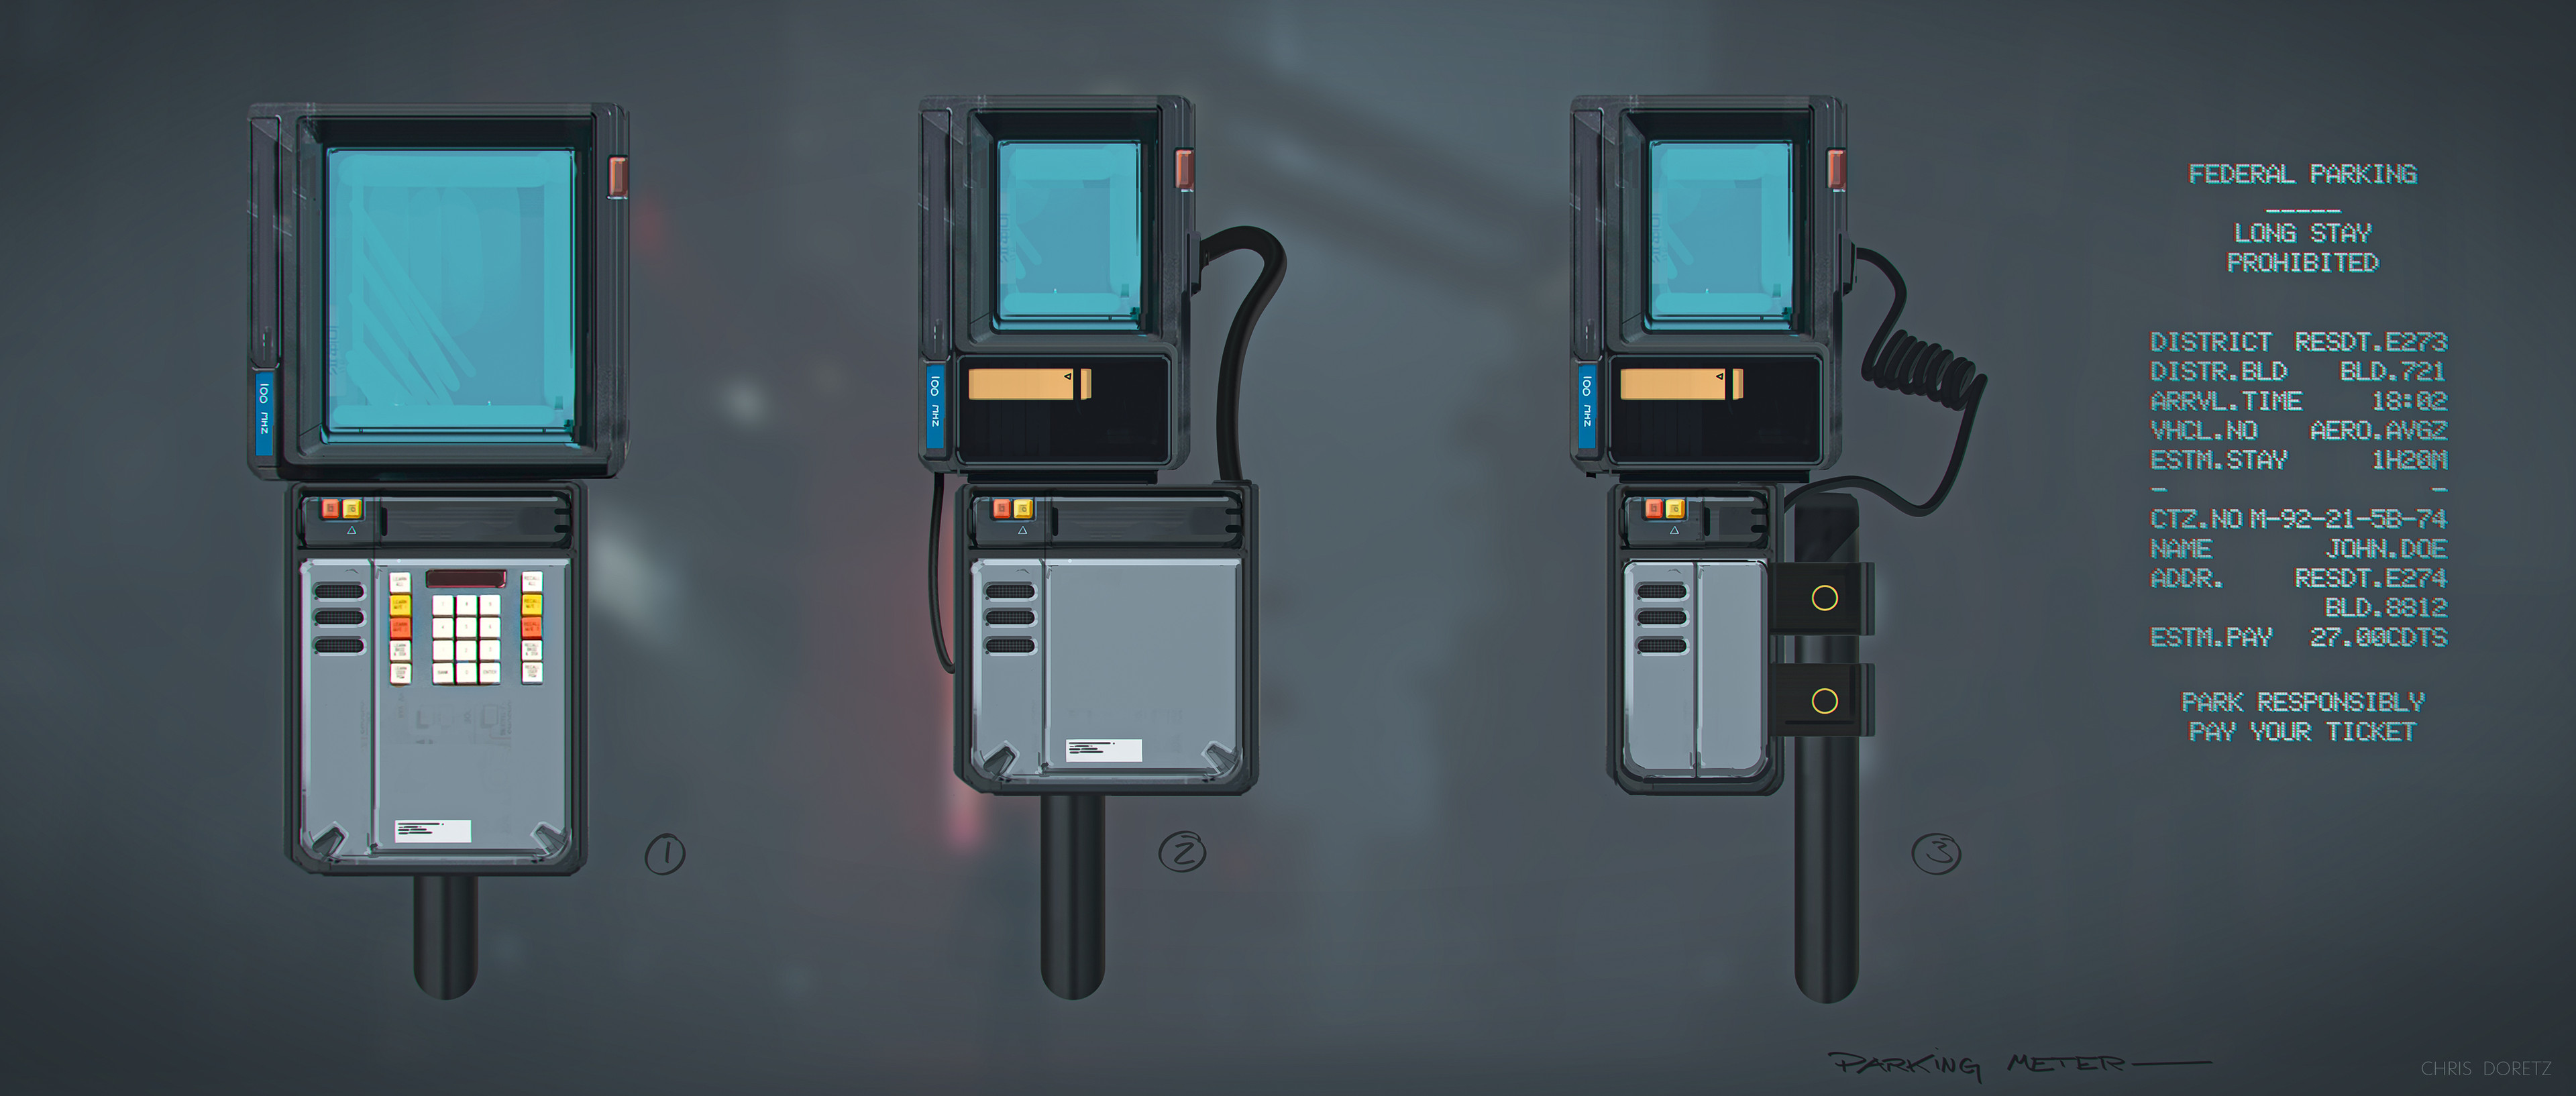 Props 2 - Parking Meter initial exploration and texture for 3D model